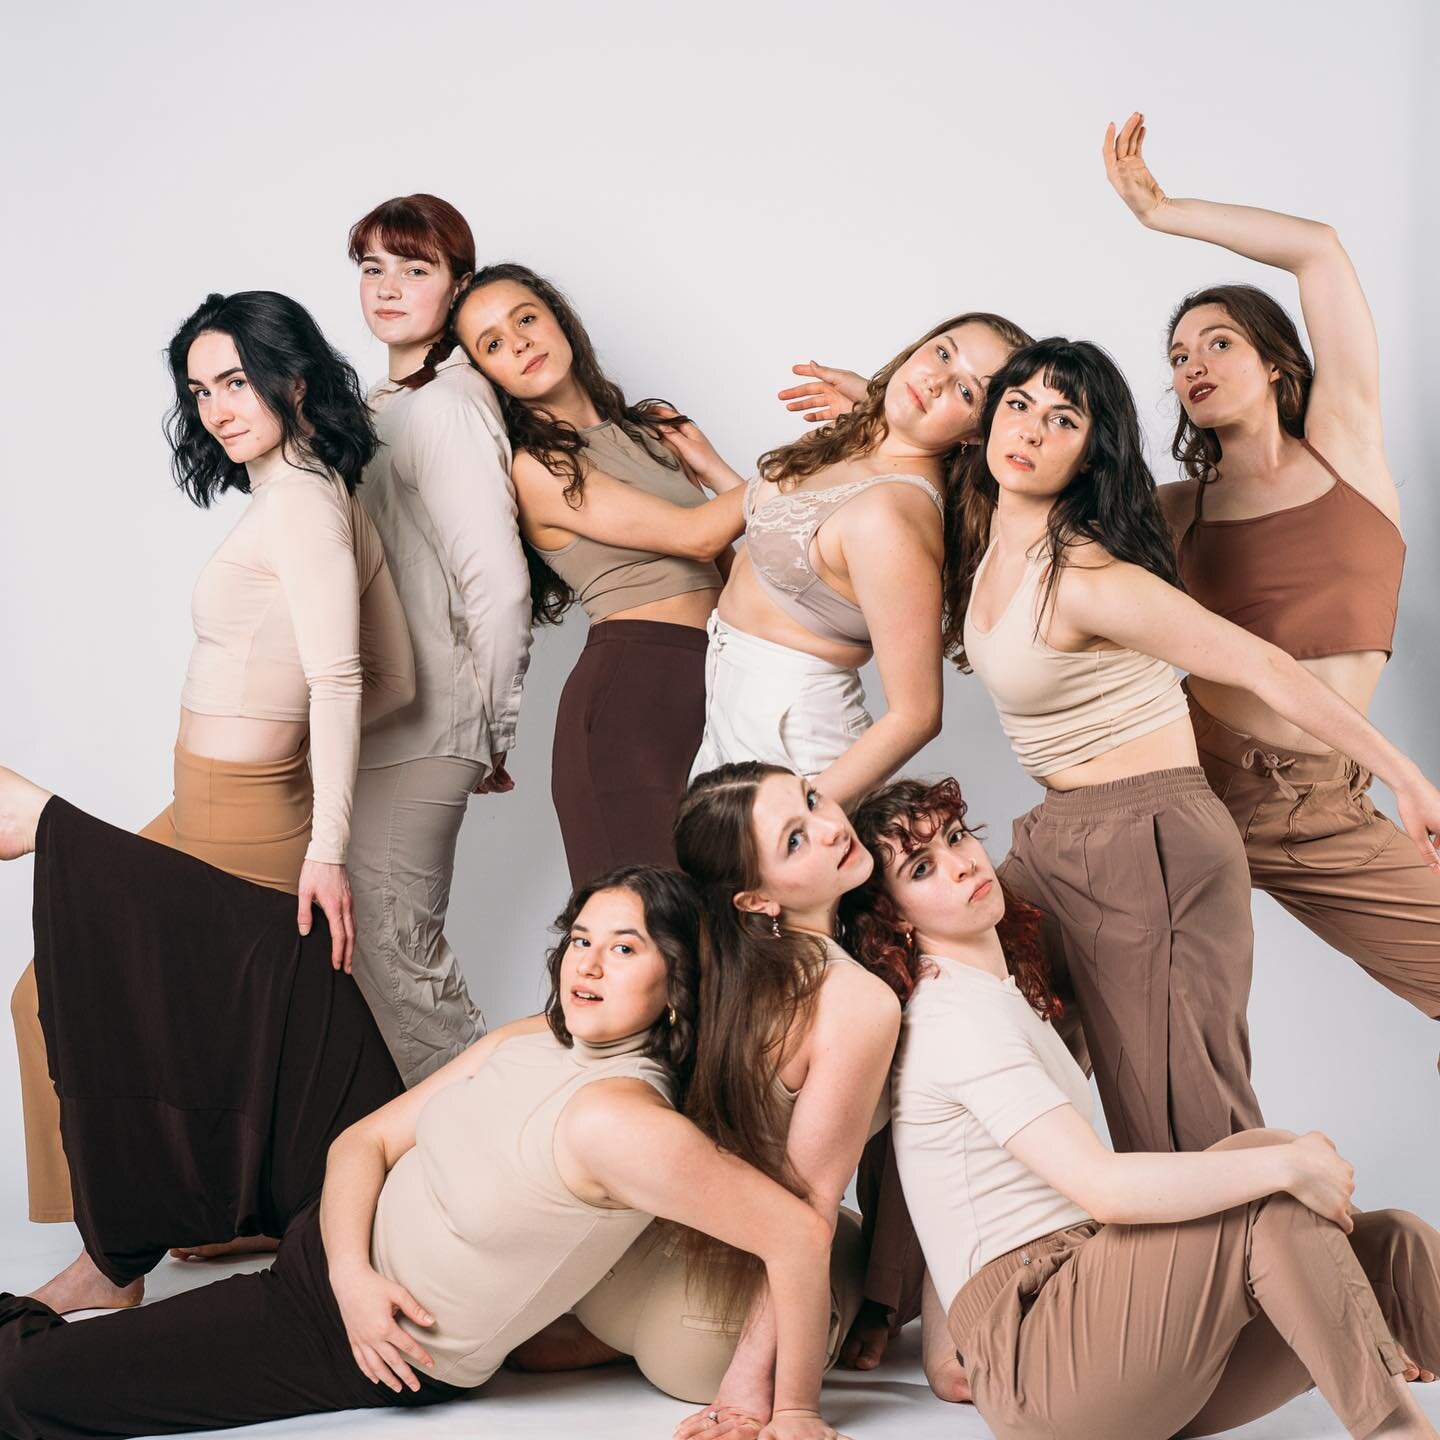 Can you help COMMON? ⬇️

On June 1st and 2nd at 7:30 PM, COMMON presents &ldquo;capsule of time&rdquo; featuring ten world premieres by eleven Chicago dancemakers, performed by COMMON&rsquo;s emerging professional conservatory artists. This show give